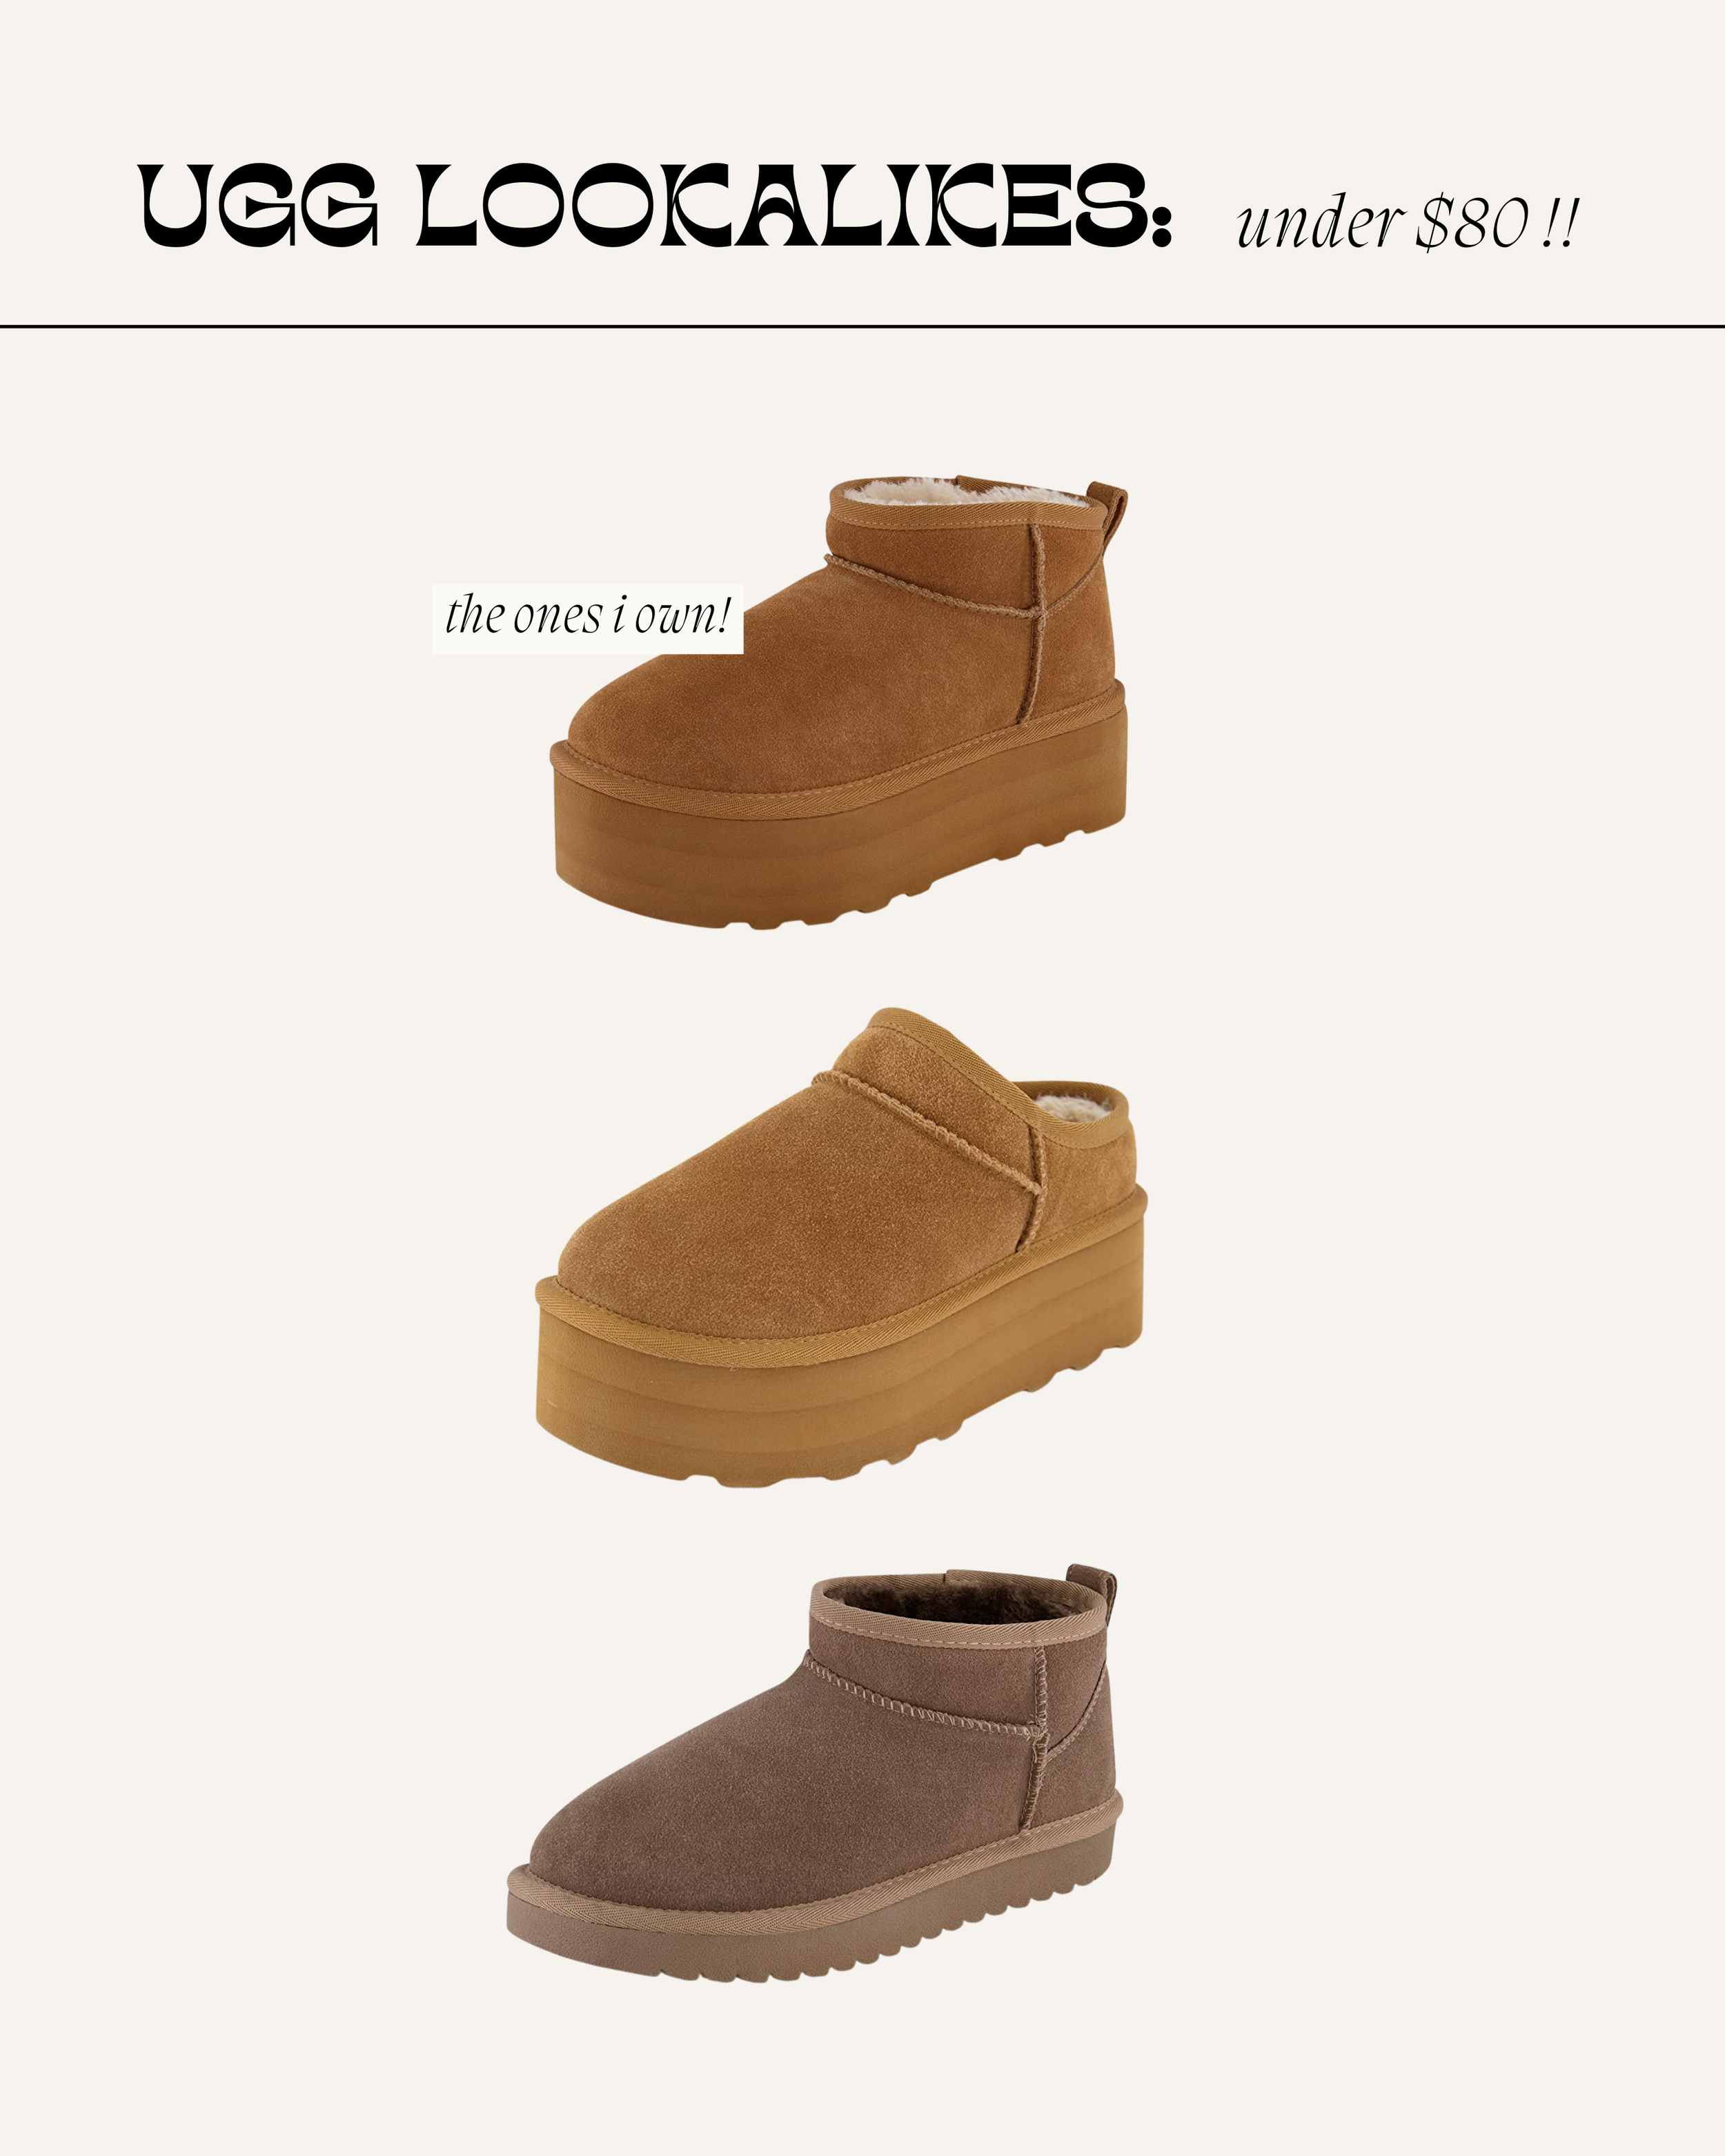 Ugg Boot Lookalike Under $80 From Amazon Review - bresheppard.com.png